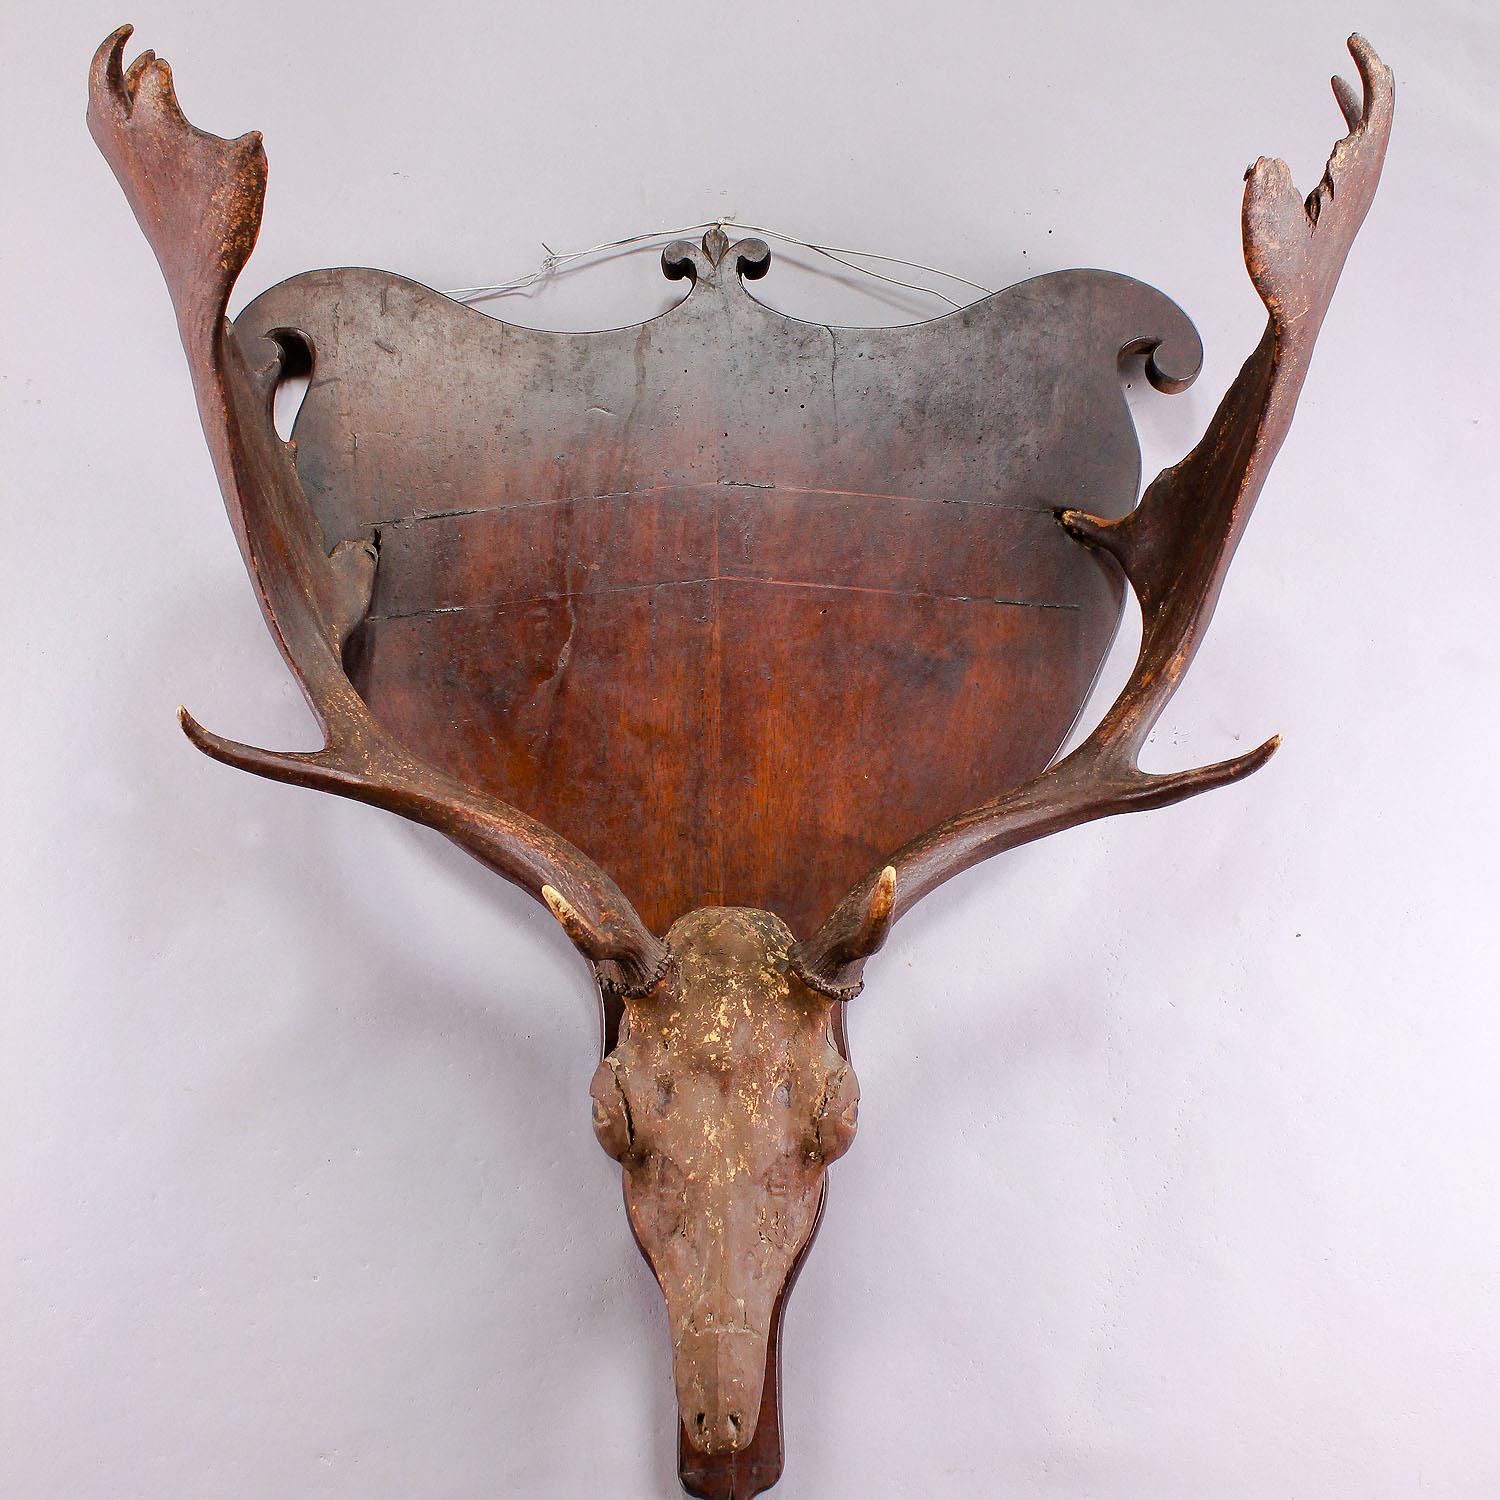 A large fallow deer trophy with genuin skull mounted on a wooden plate. Skull covered with resine and painted. May have been used as shelve or coat rack. Italy mid of 19th century.

Width: 25.59